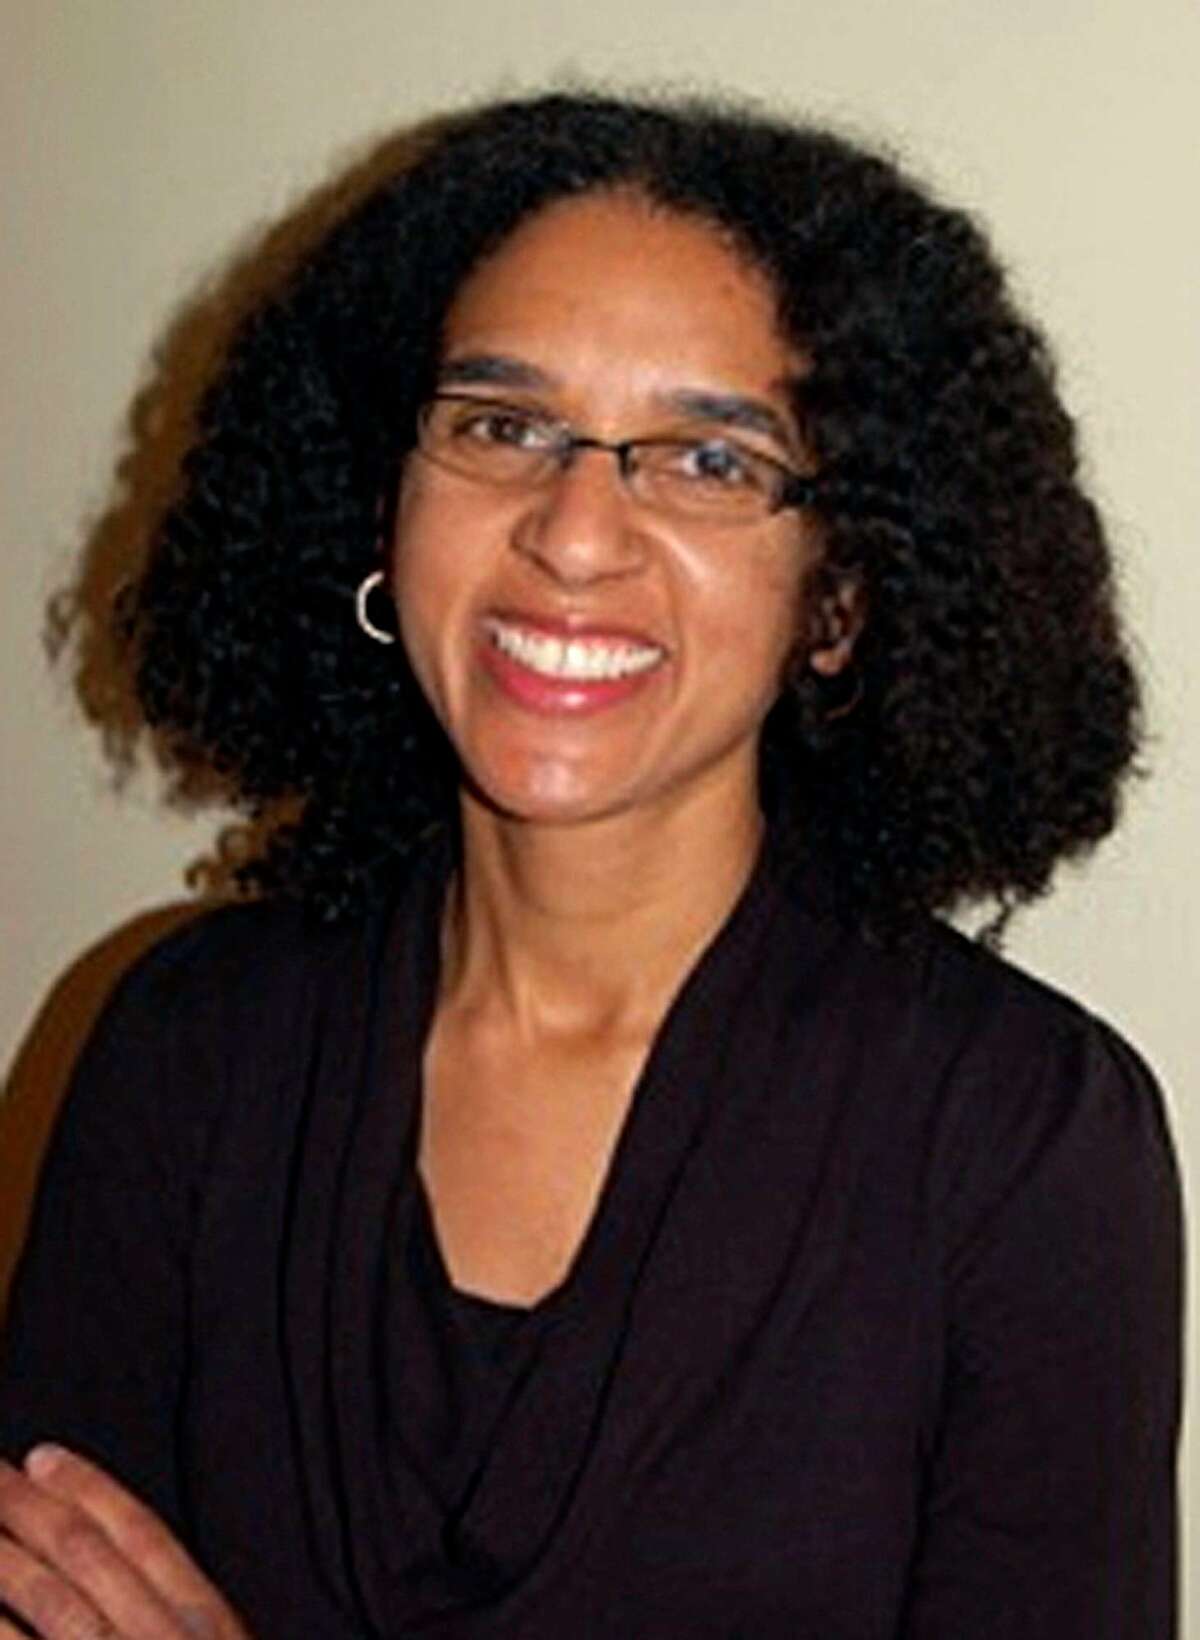 This undated photo released by the California Governor's Office shows Leondra Kruger. In his effort to diversify the judicial branch, Gov. Jerry Brown on Monday, Nov. 24, 2014, nominated a deputy assistant U.S. attorney general to fill a vacant seat on the California Supreme Court. The governor selected Kruger, a 38-year-old Los Angeles native, to replace Associate Justice Joyce Kennard, who retired earlier this year. (AP Photo/California Governor's Office)